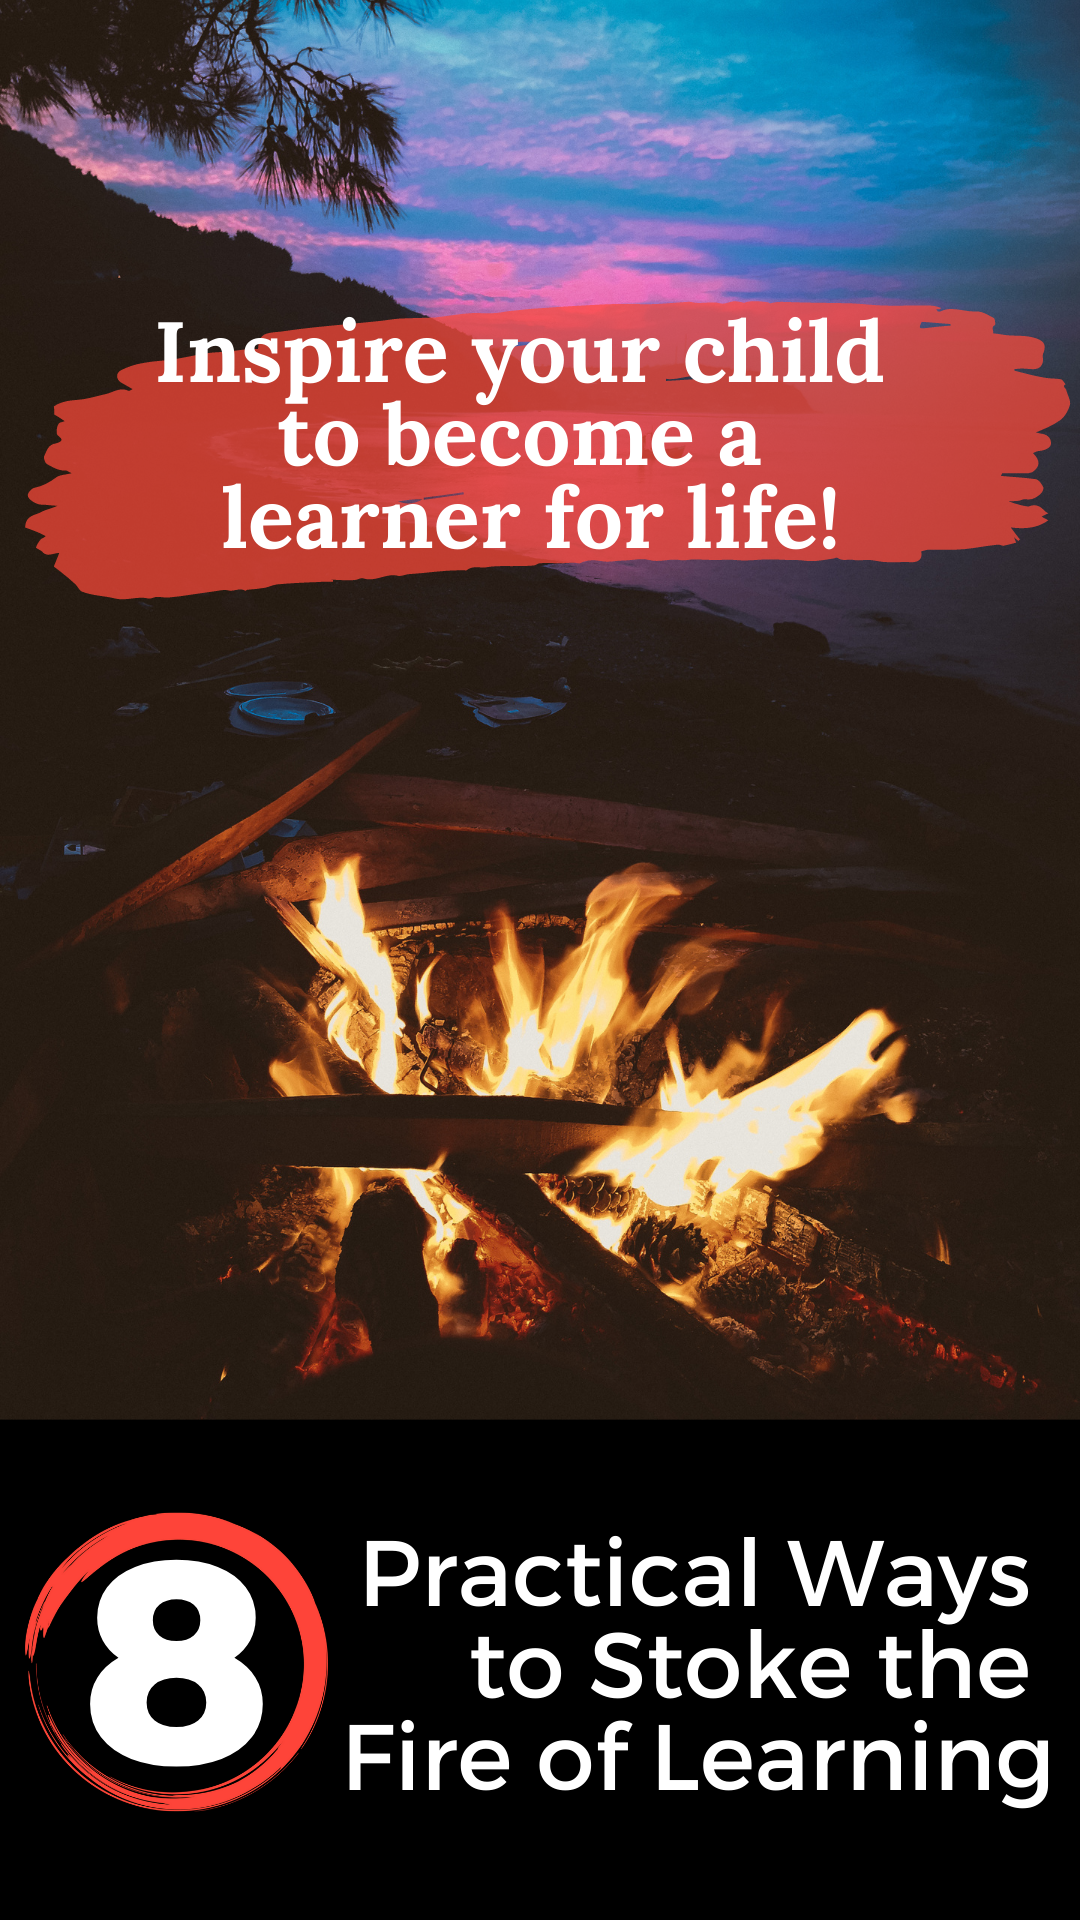 Practical Ways to Stoke the Fire of Learning